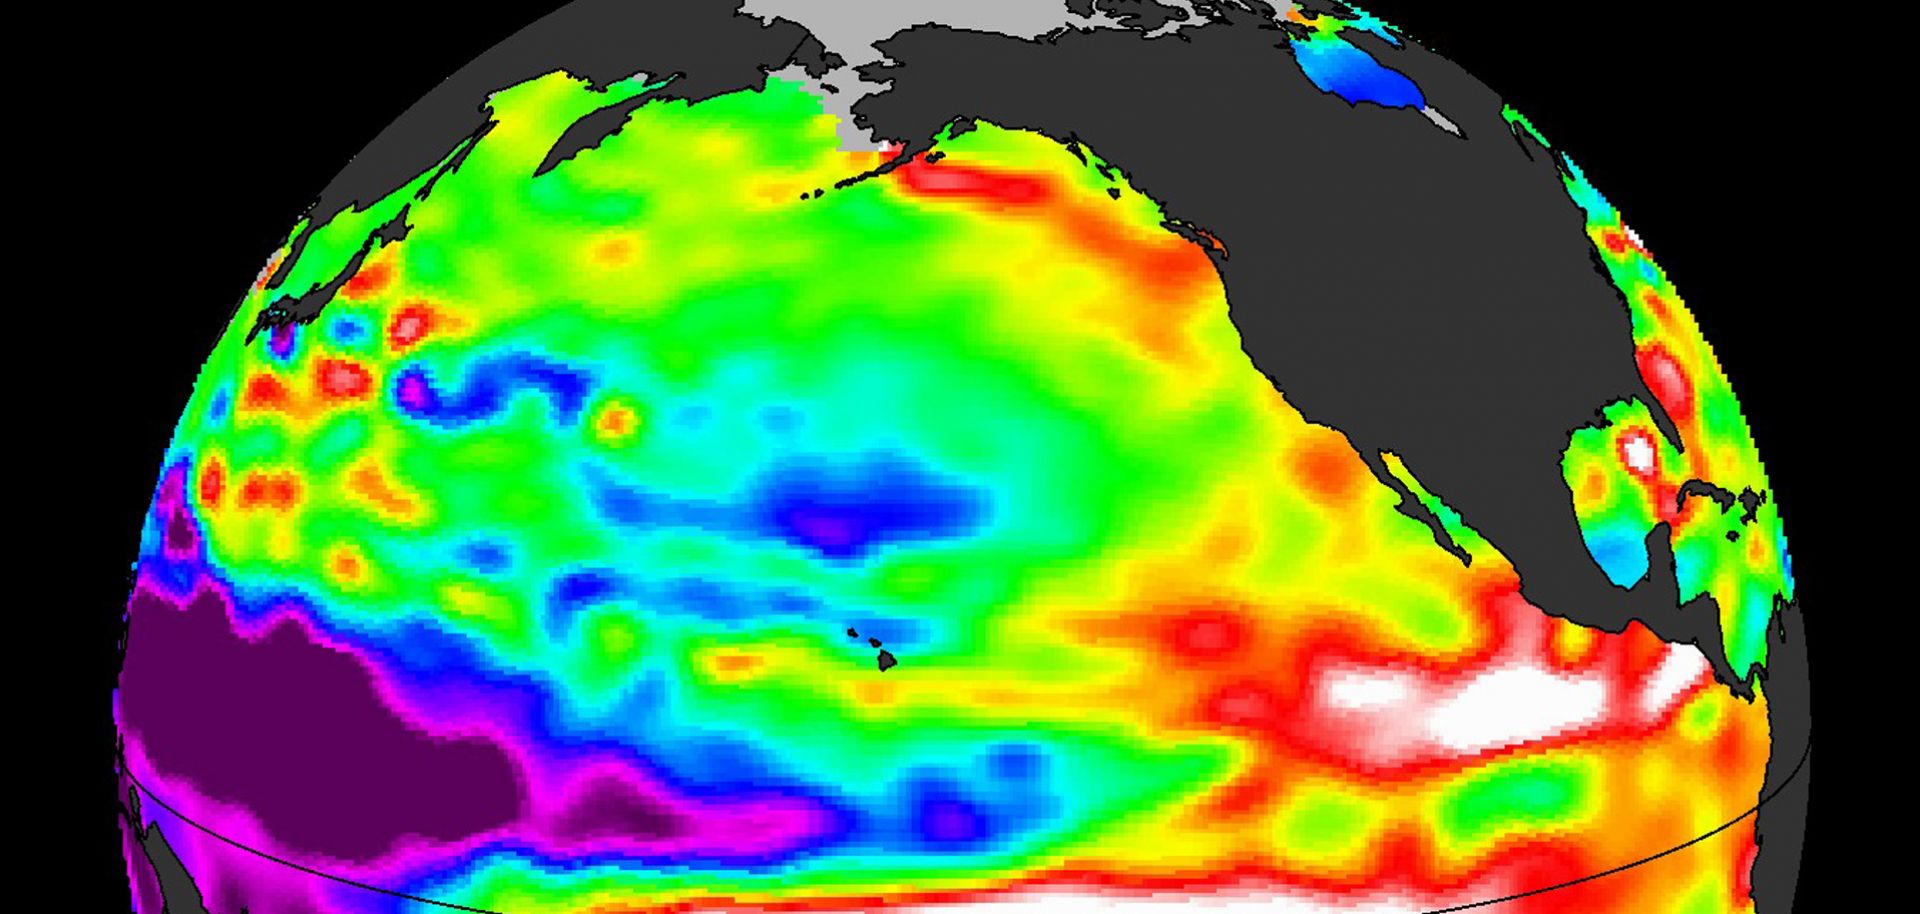 An image taken by NASA Jet Propulsion Laboratory's Jason-2 satellite on Aug. 20 shows sea surface height, which can be used to calculate how much heat is stored in the ocean below.